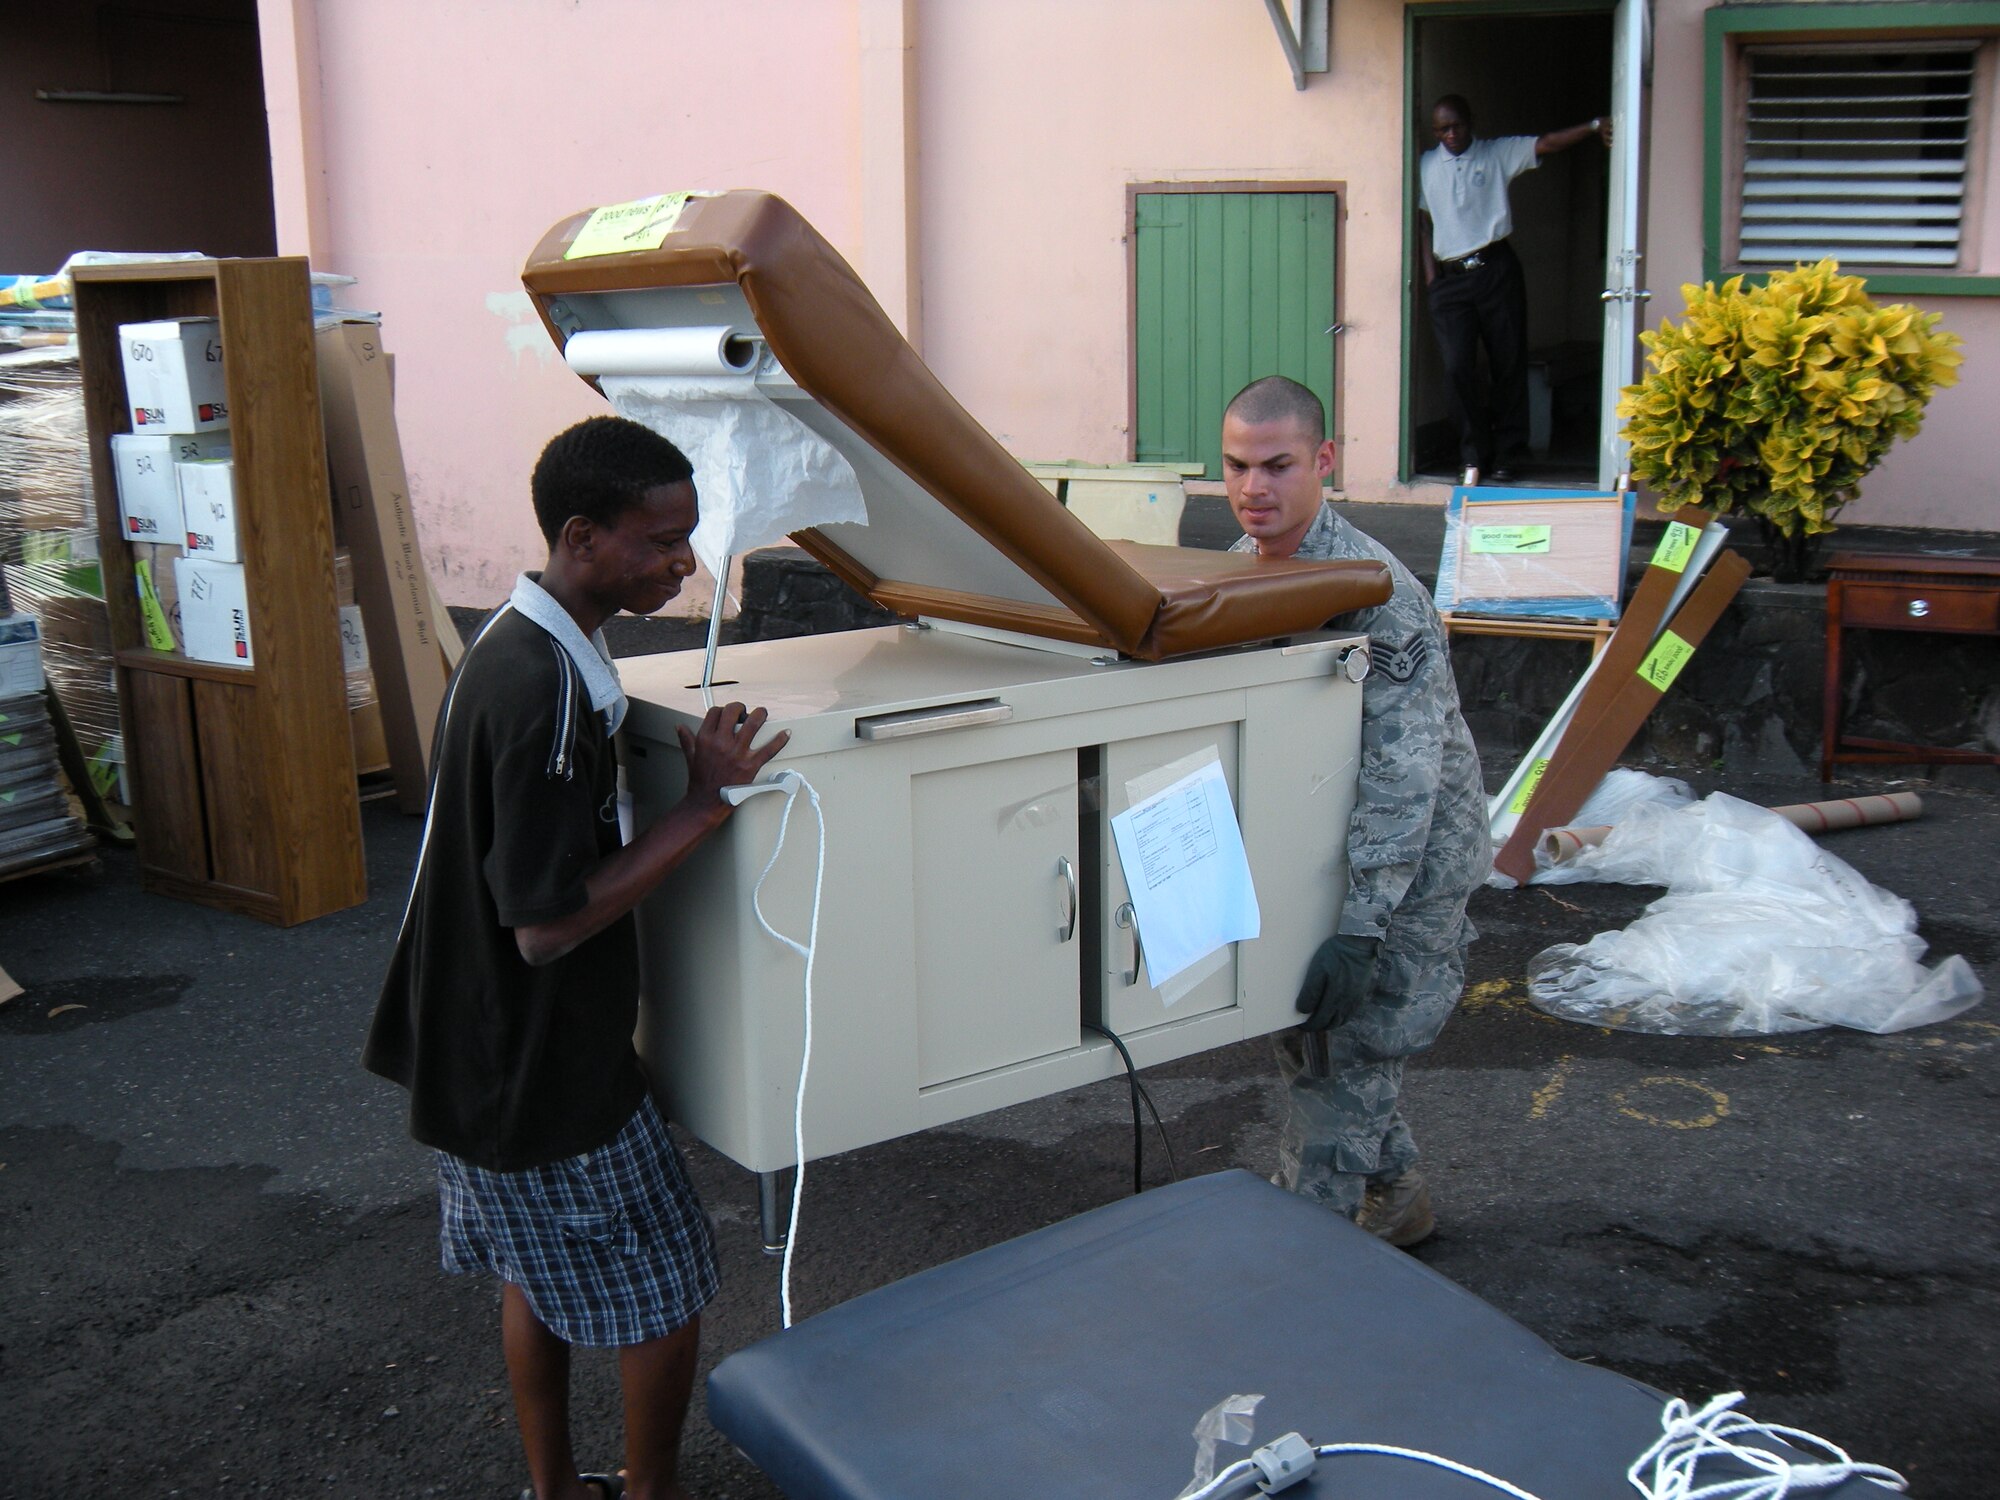 Staff Sgt. Daniel Osorio, 52nd Airlift Squadron C-130 Hercules crew chief, helps a local man move an examination table during an Oct. 30 delivery of humanitarian supplies to the Caribbean island of St. Vincent. The supplies, donated by the Wausau, Wis. based Good News Project, included hospital and mental health supplies as well as desks, paper and school supplies to various locations on the island. The Air Force Reserve aircraft transported the supplies under the Denton Amendment, which authorizes U.S. military aircraft via Congress to airlift humanitarian supplies based on space availability and other factors. Sergeant Osorio is an Active Duty Airman associated with the AF Reserve's 302nd Airlift Wing based at Peterson Air Force Base, Colo. (U.S. Air Force photo/Staff Sgt. Stephen J. Collier)